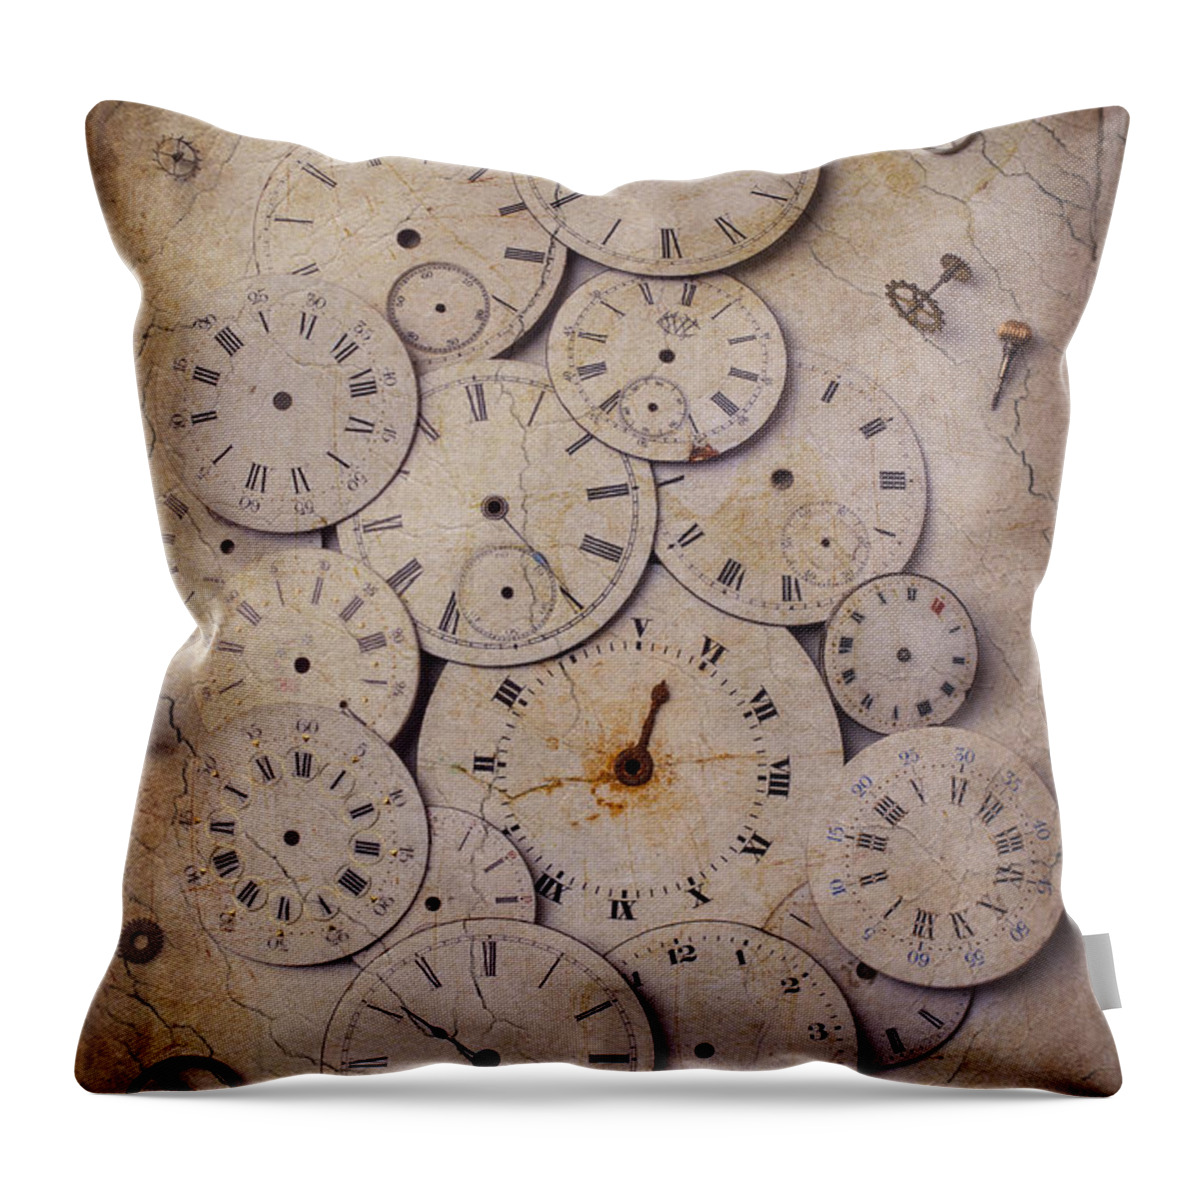 Time Throw Pillow featuring the photograph Time Forgotten by Garry Gay